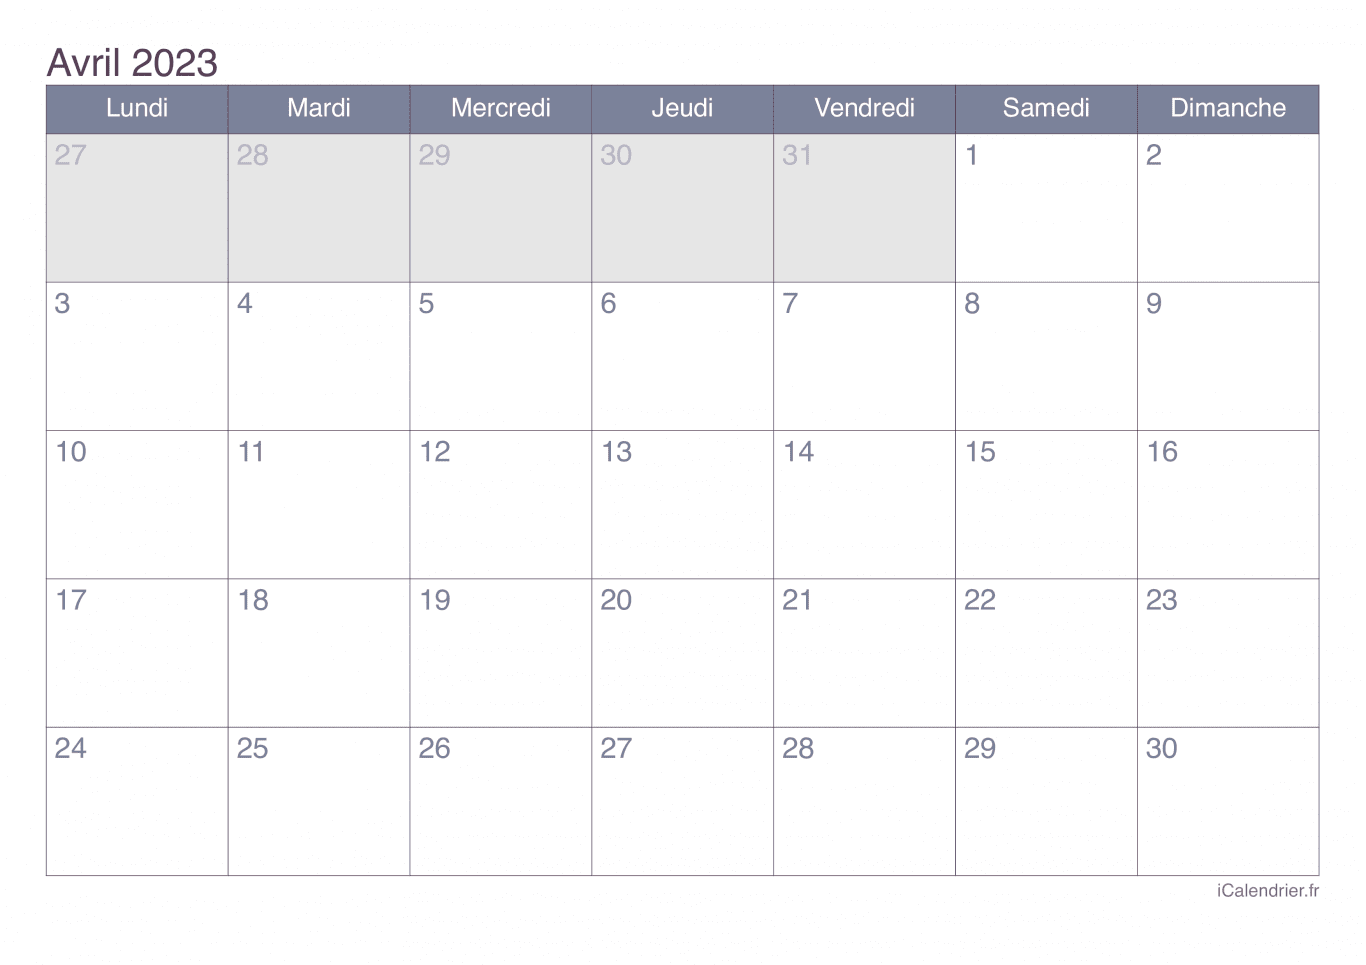 Calendrier d'avril 2023 - Office